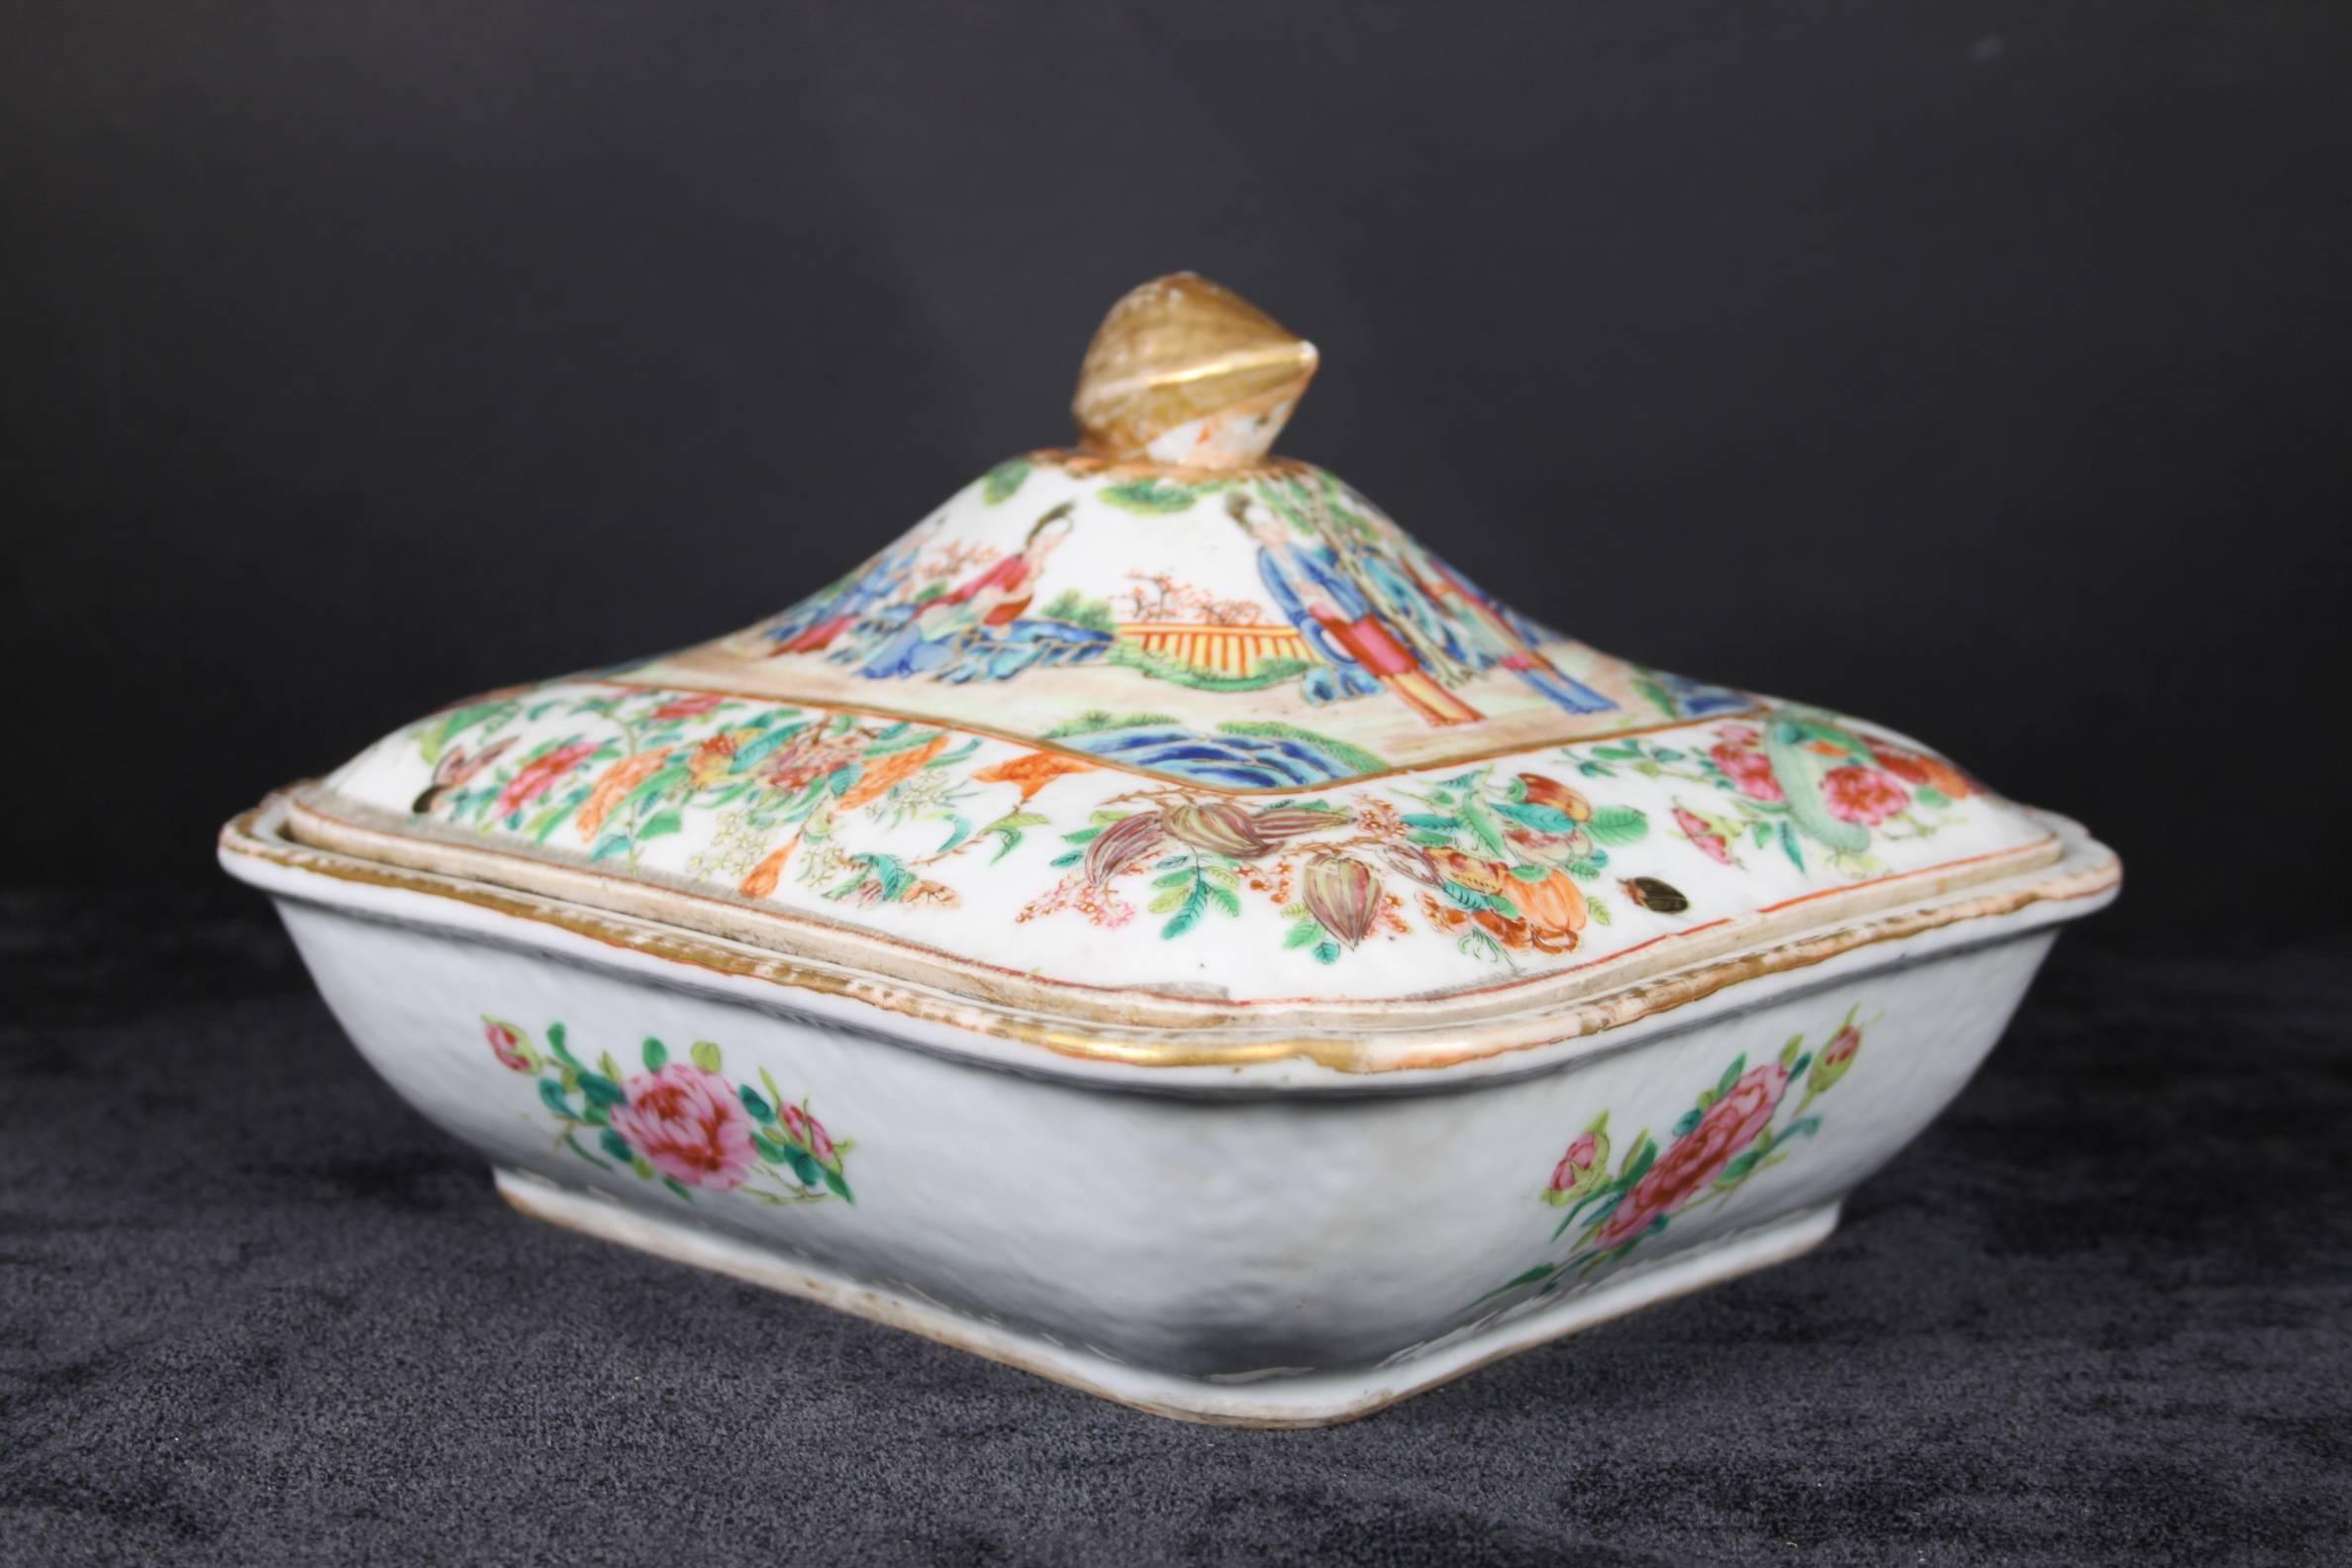 19th Century 1850 Chinese Porcelain Canton ware Famille Rose Export Tureen Dish In Excellent Condition For Sale In Harrogate, GB